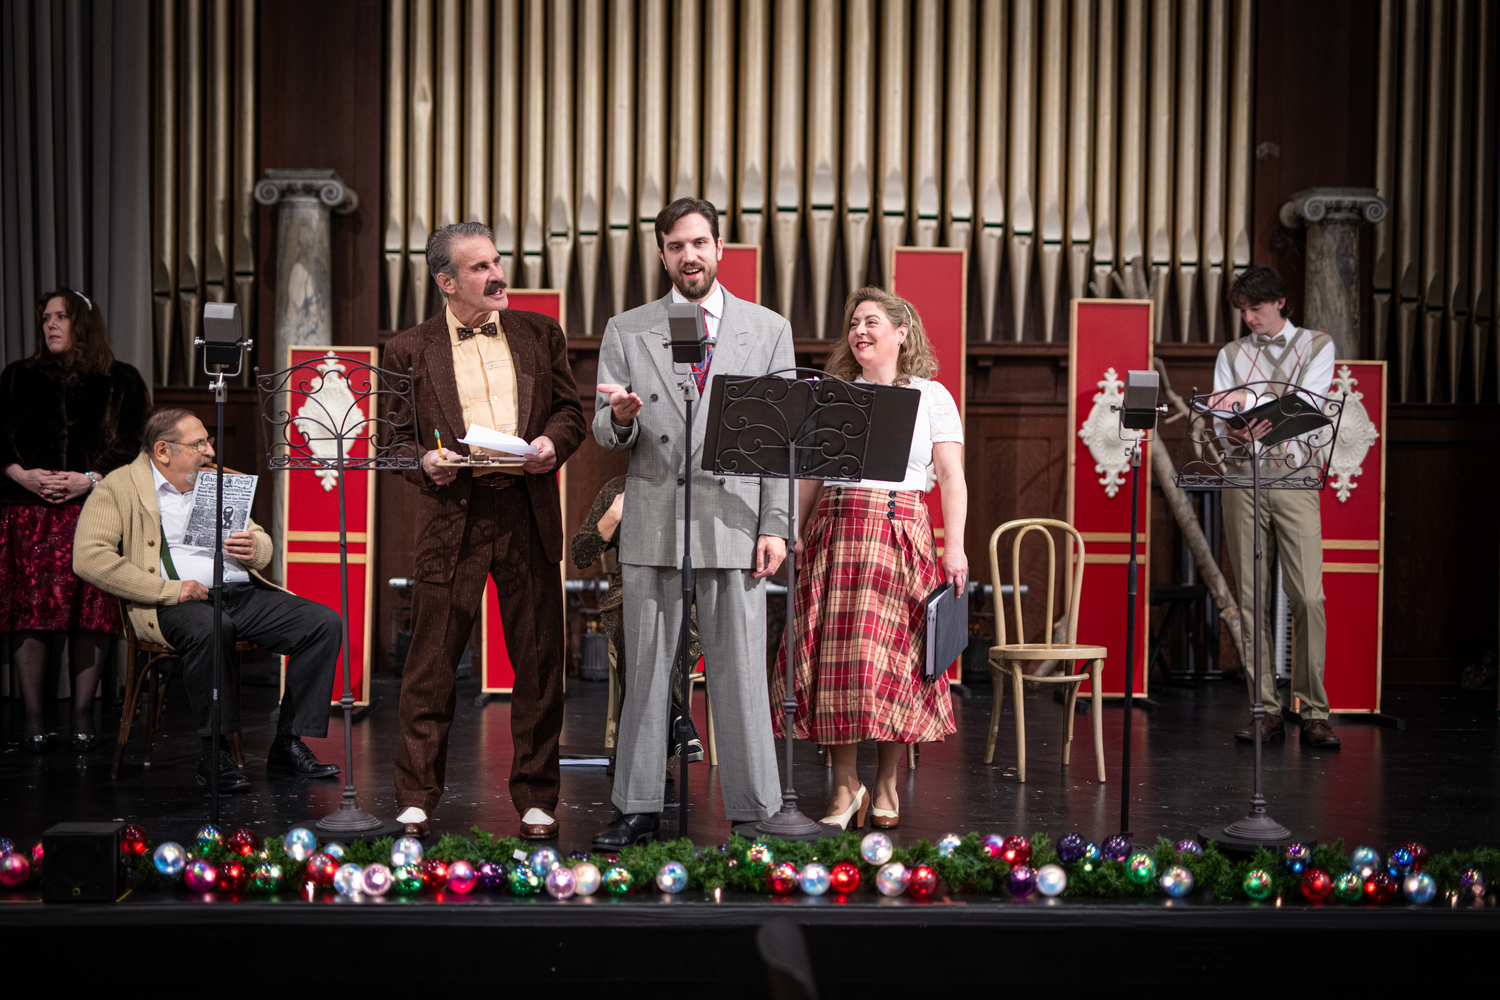 Tom Gregory, Tim Ferris and Michaael Lyn Schepps at the mic in the Center Stage production of “The Big Christmas Show: A Musical Radio Play” at Southampton Arts Center. DANE DUPUIS